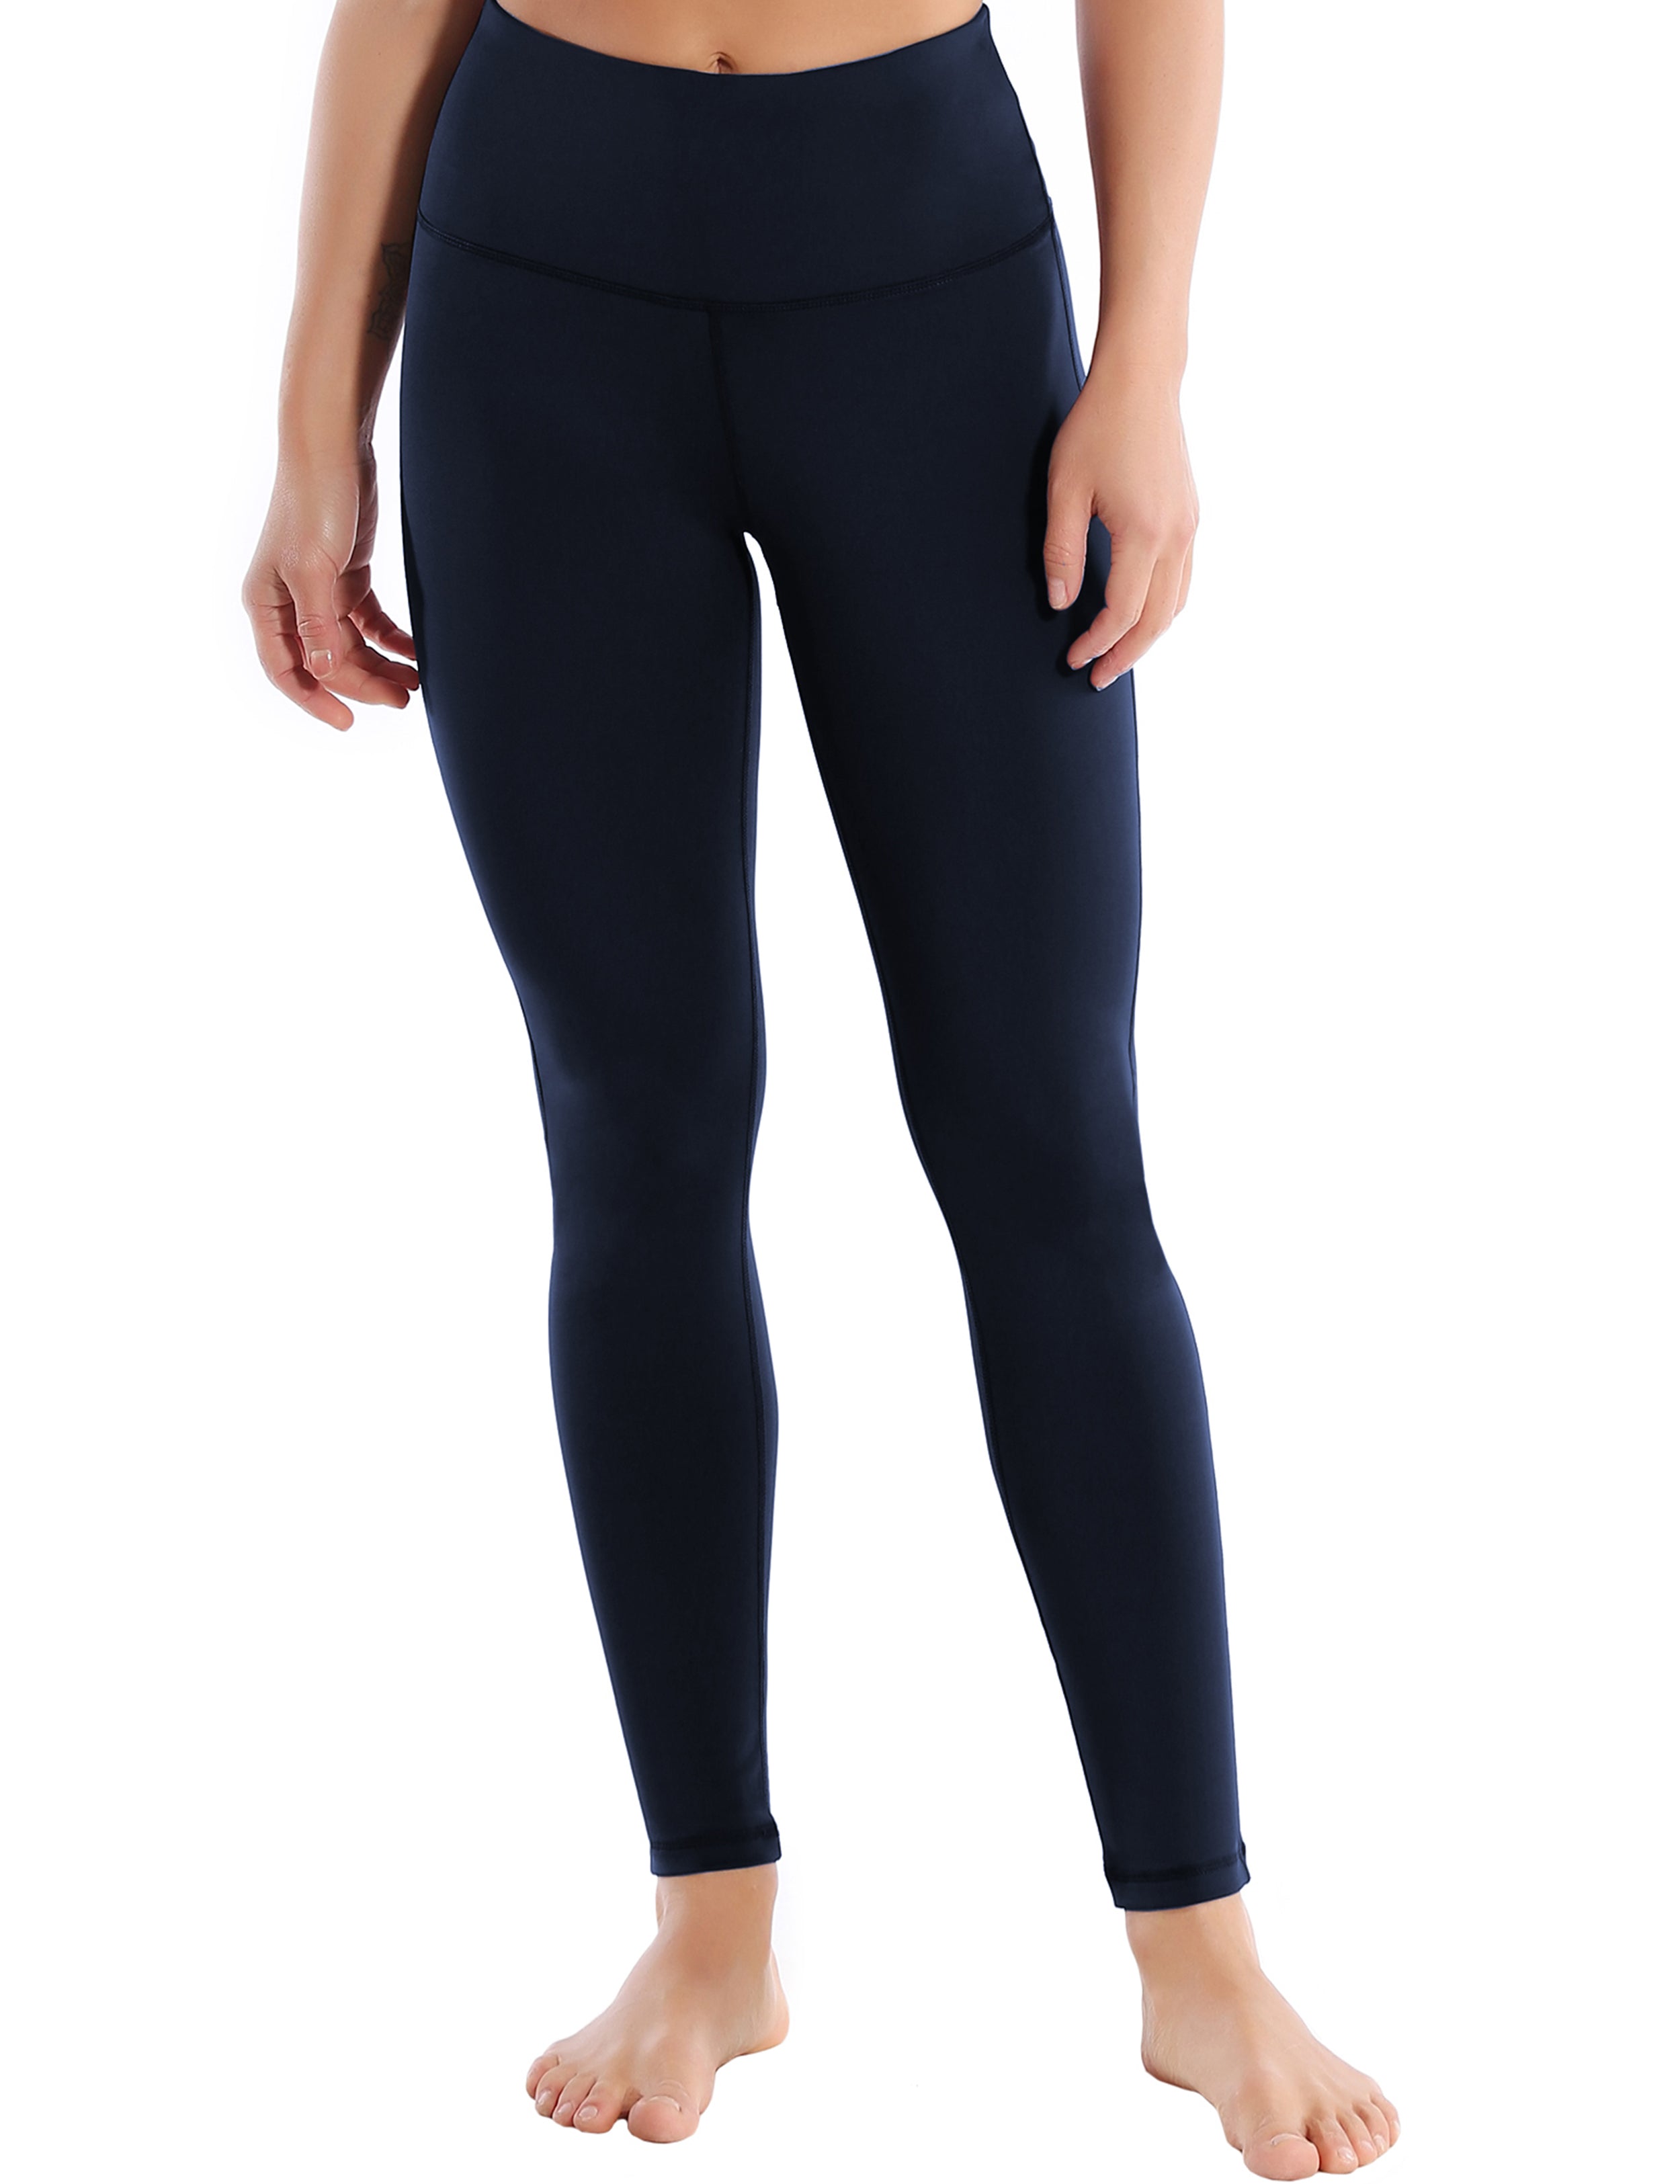 High Waist Side Line Jogging Pants darknavy Side Line is Make Your Legs Look Longer and Thinner 75%Nylon/25%Spandex Fabric doesn't attract lint easily 4-way stretch No see-through Moisture-wicking Tummy control Inner pocket Two lengths